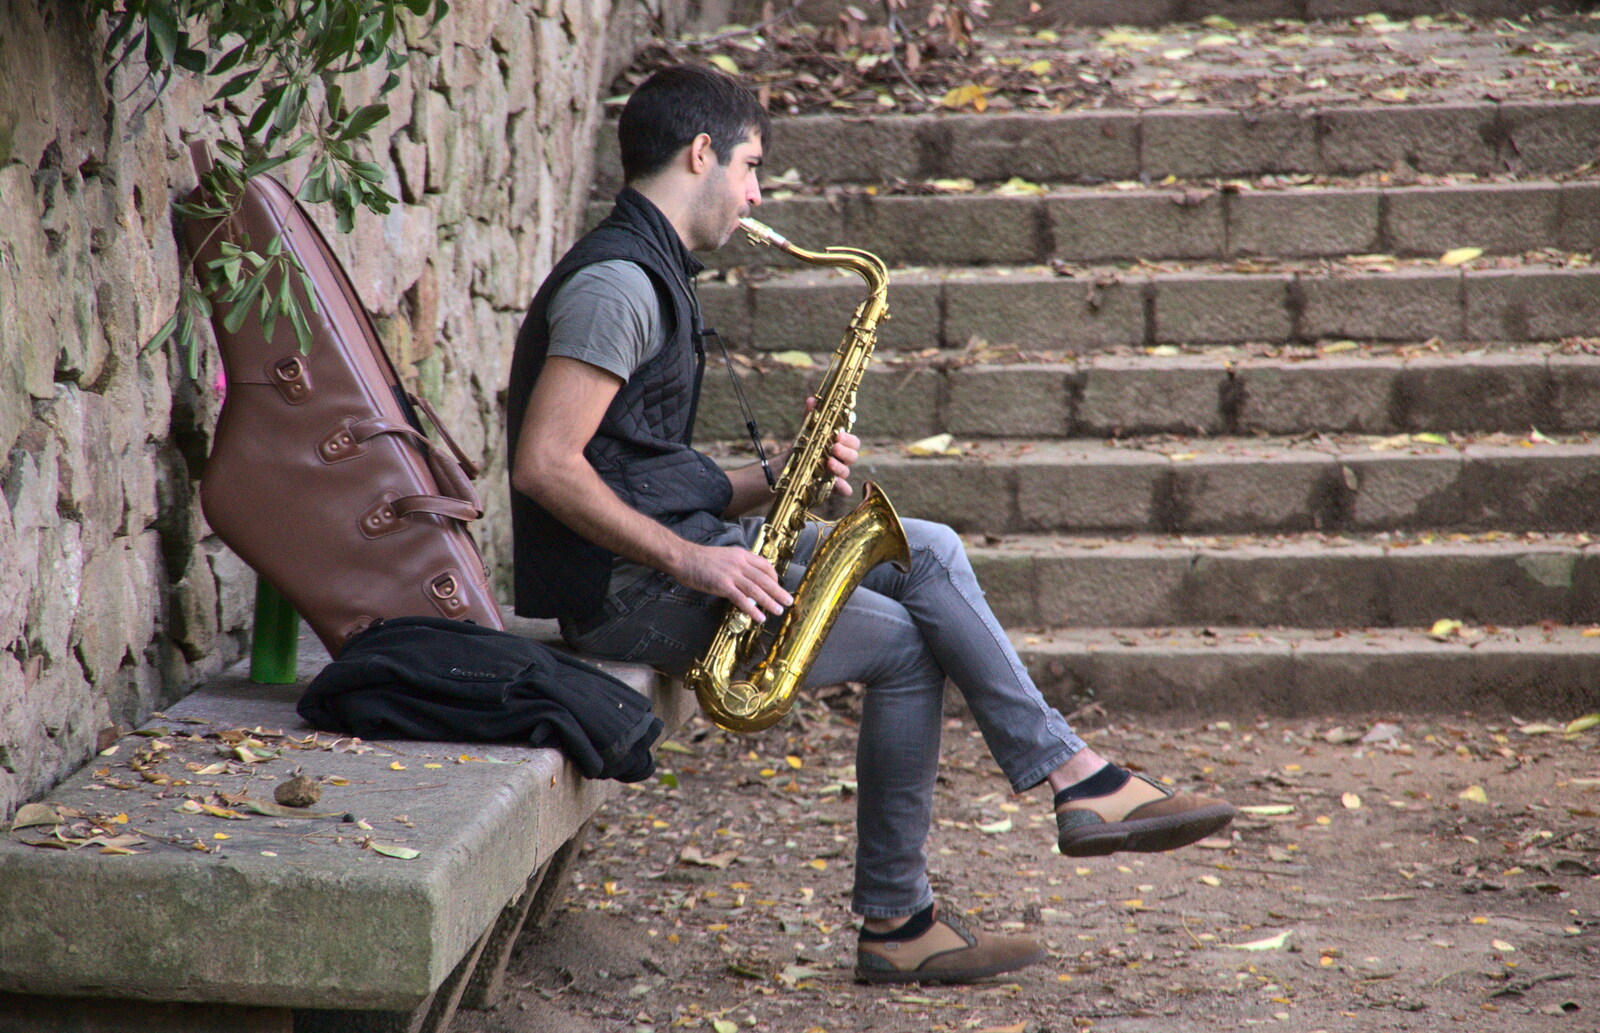 Saxophone in the woods from Barcelona and Parc Montjuïc, Catalonia, Spain - 21st October 2017